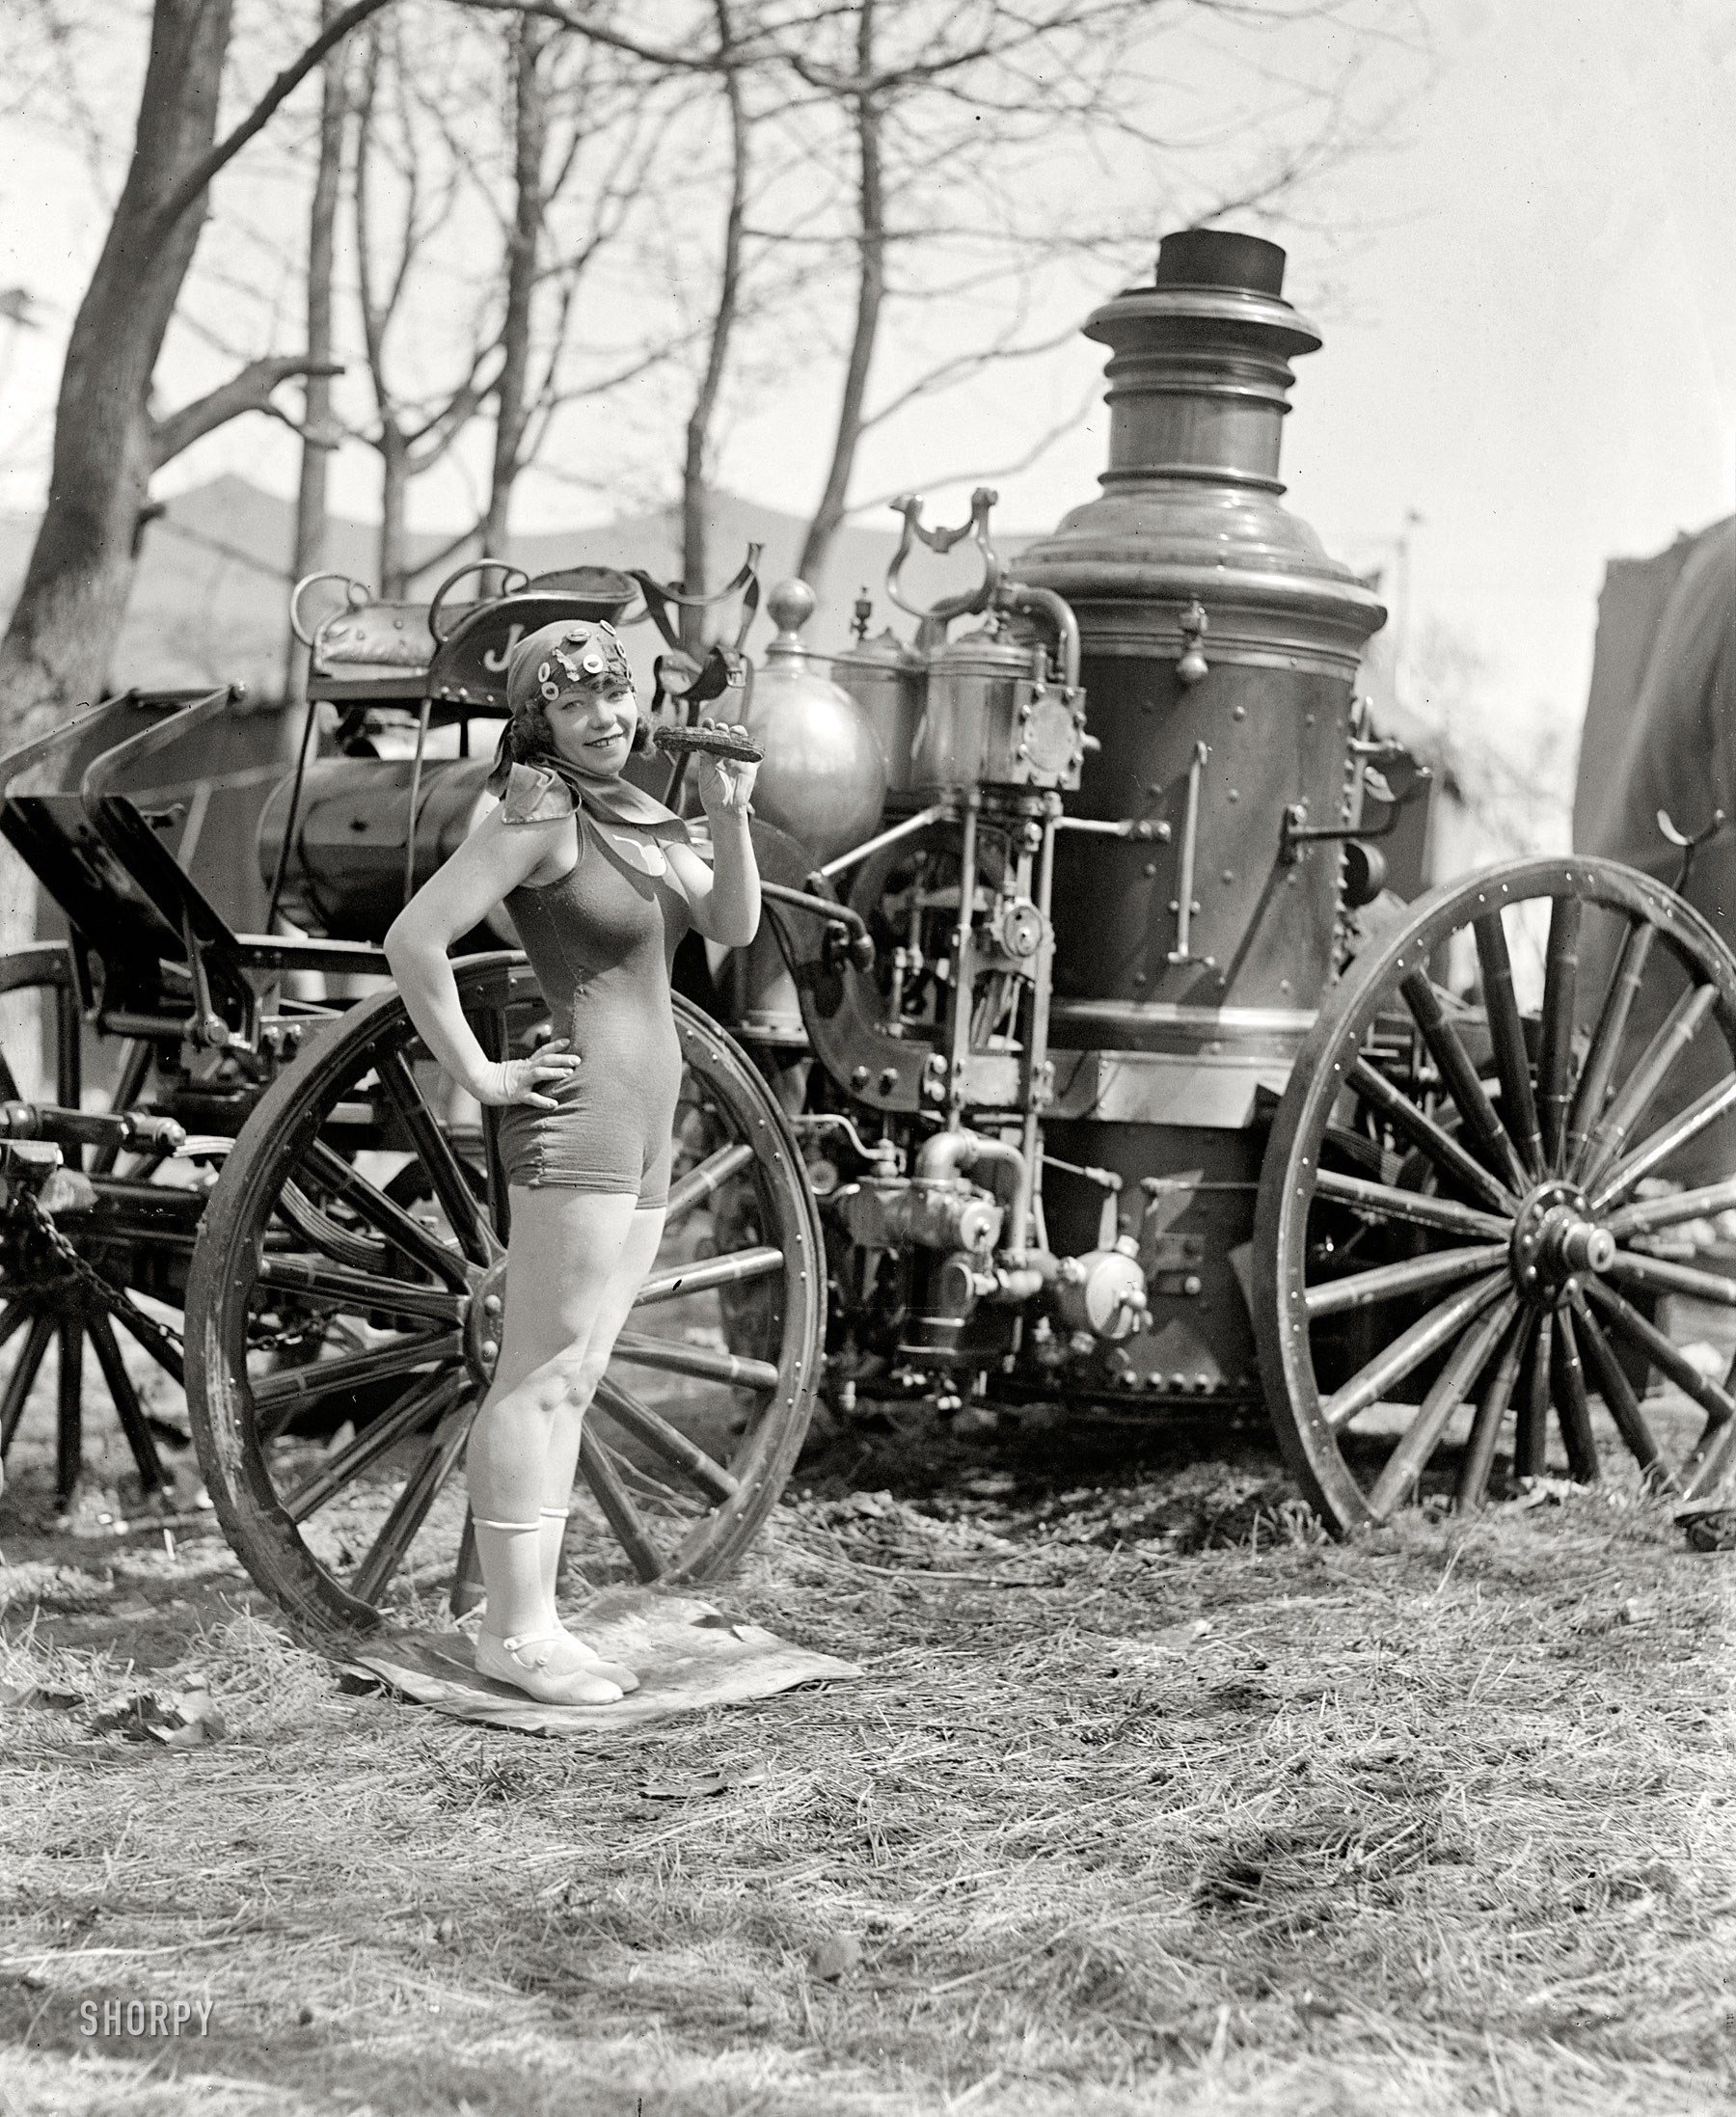 "Beatrice Kyle, in high diving outfit, between acts at the Society Circus at Fort Myer, Virginia, for the benefit of the Army Relief Fund, April 25, 1924." In what looks like a marketing tie-in for carny food and old fire engines. View full size.